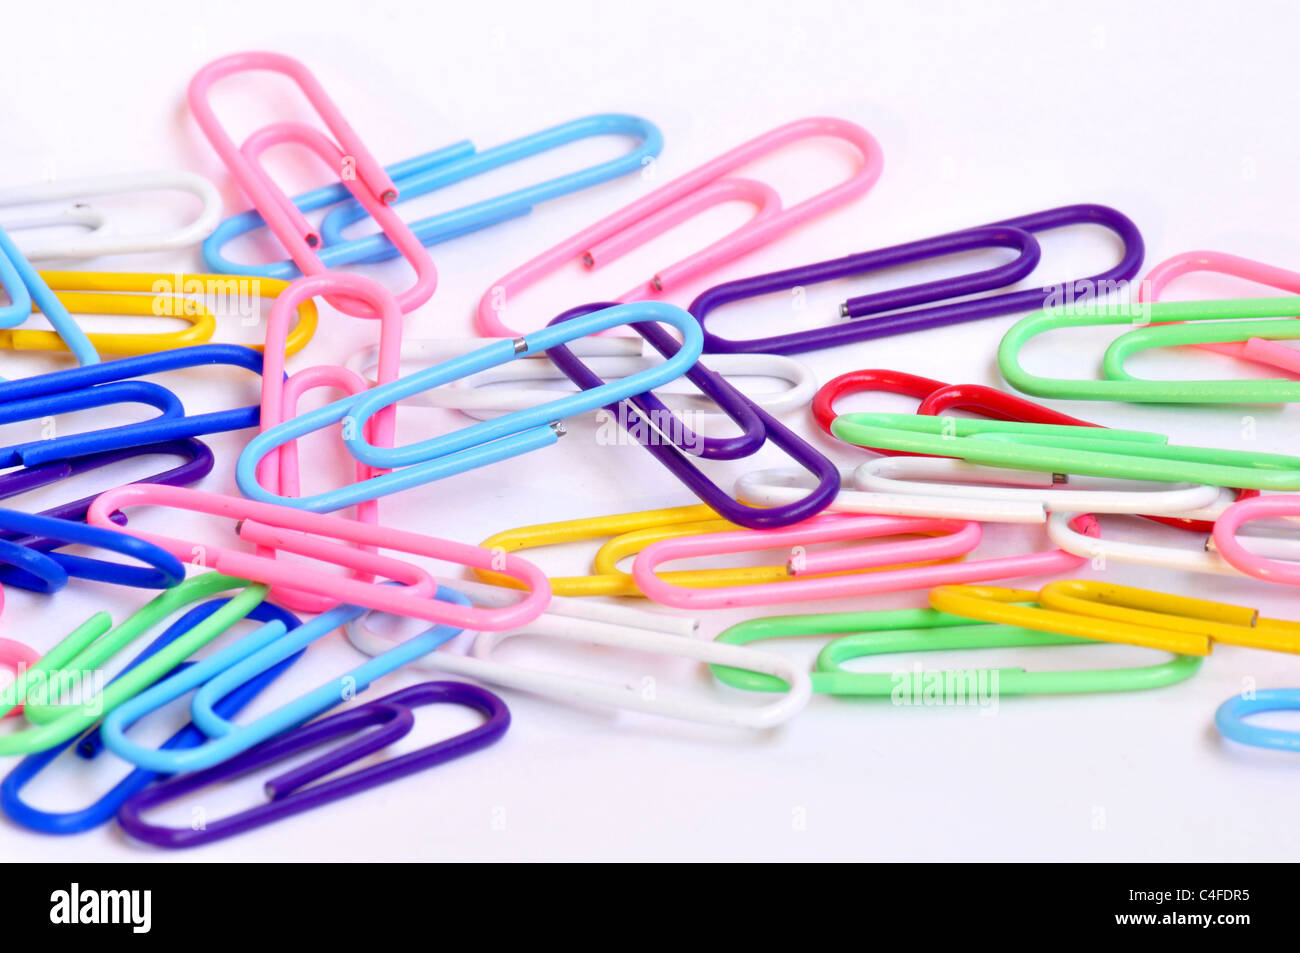 Colorful Paper clips Stock Photo